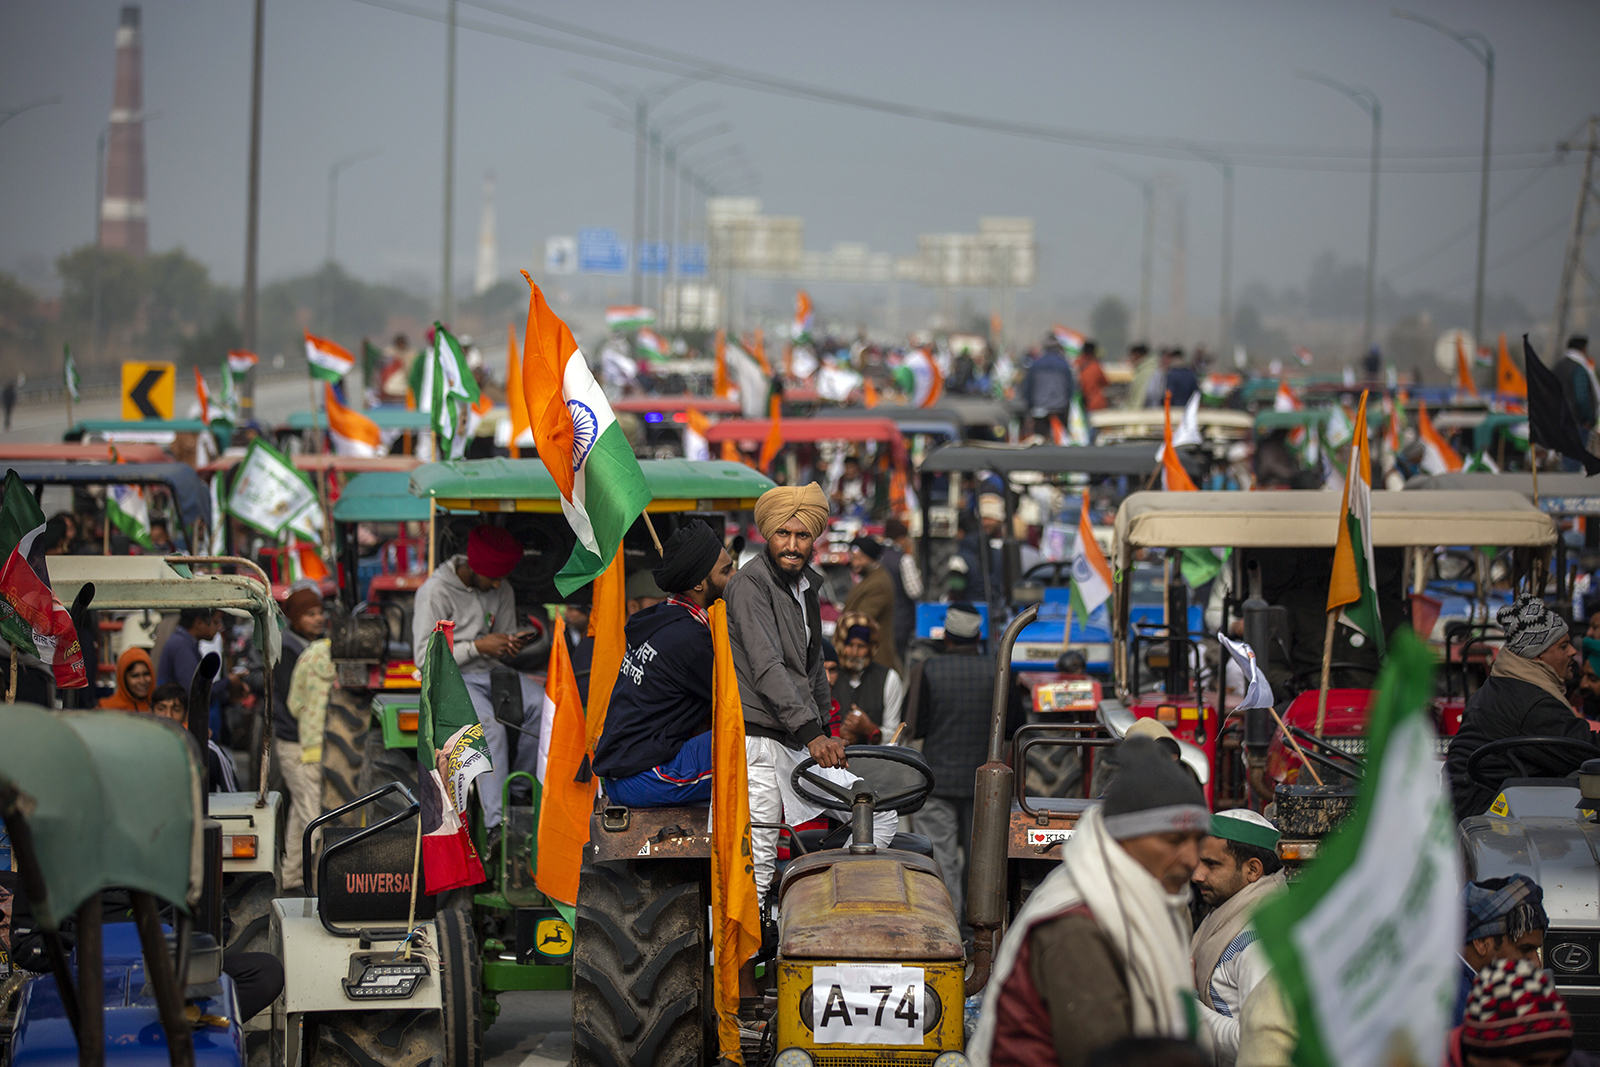 Indian farmers participate in a tractor rally in a protest against new farm laws at Ghaziabad, on the outskirts of New Delhi, on Jan. 7, 2021. India’s top court temporarily put on hold the implementation of new agricultural laws and ordered the formation of an independent committee of experts to negotiate with farmers who have been protesting against the legislation. (AP Photo/Altaf Qadri, File)